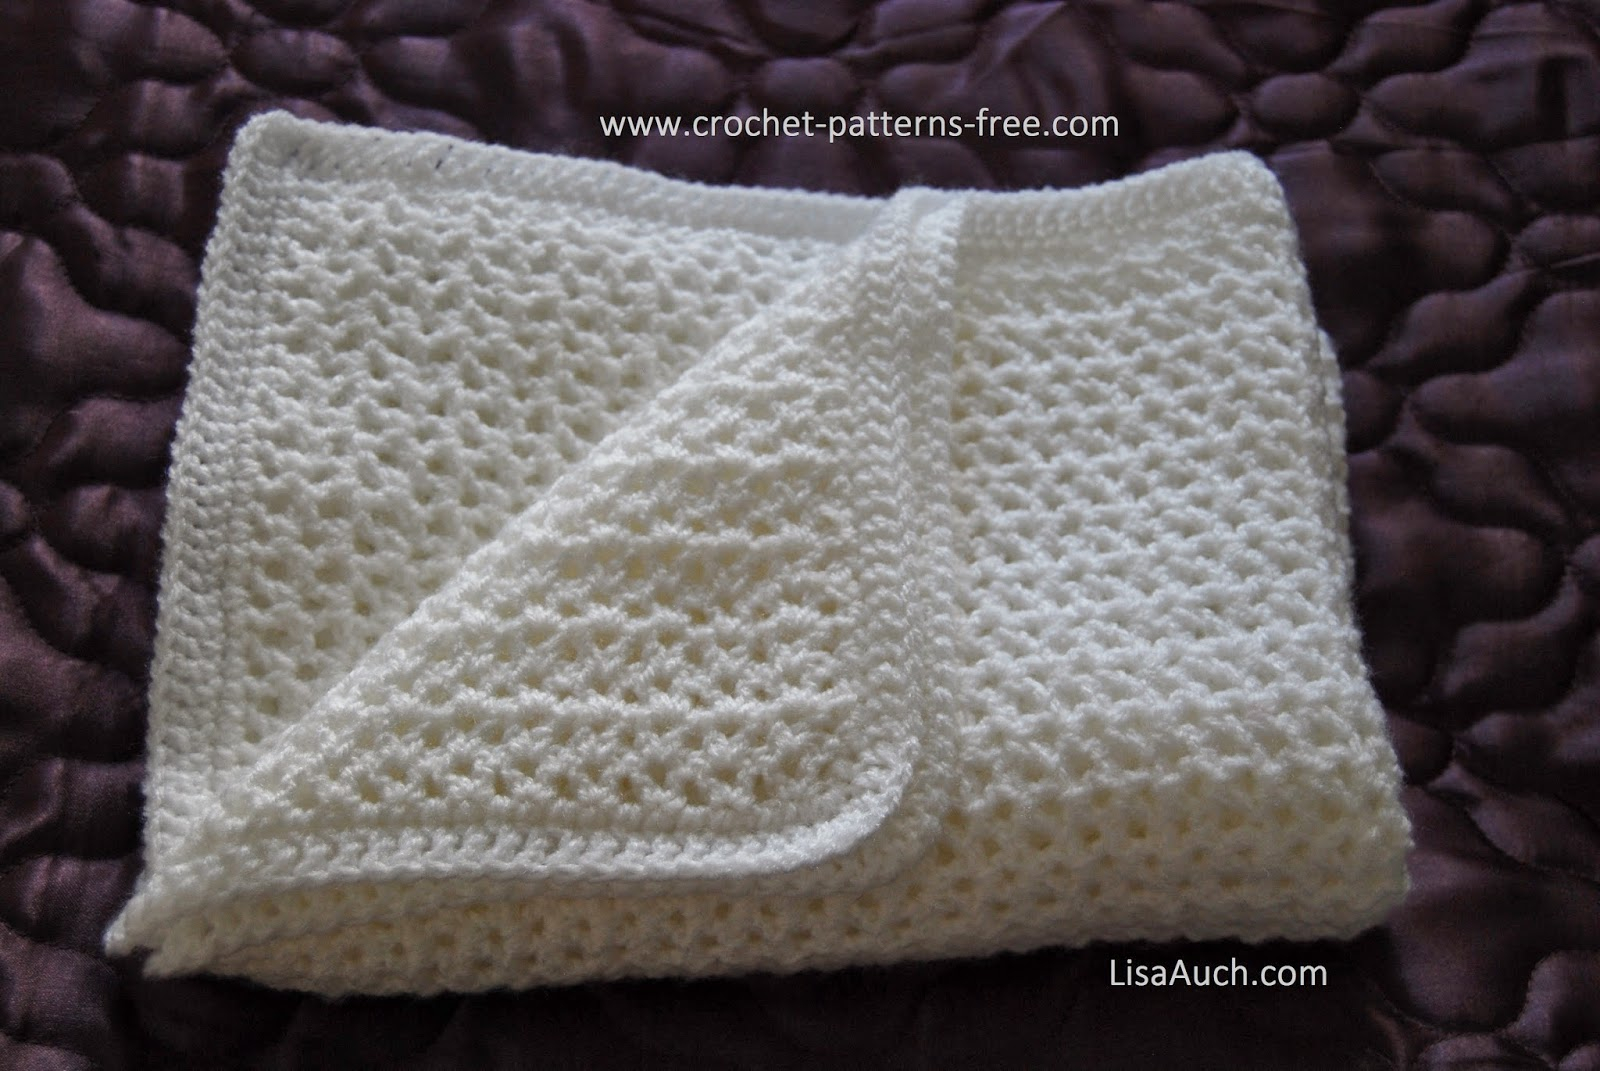 Crochet Pattern For Baby Blanket Free Crochet Patterns And Designs Lisaauch Free Crochet Ba